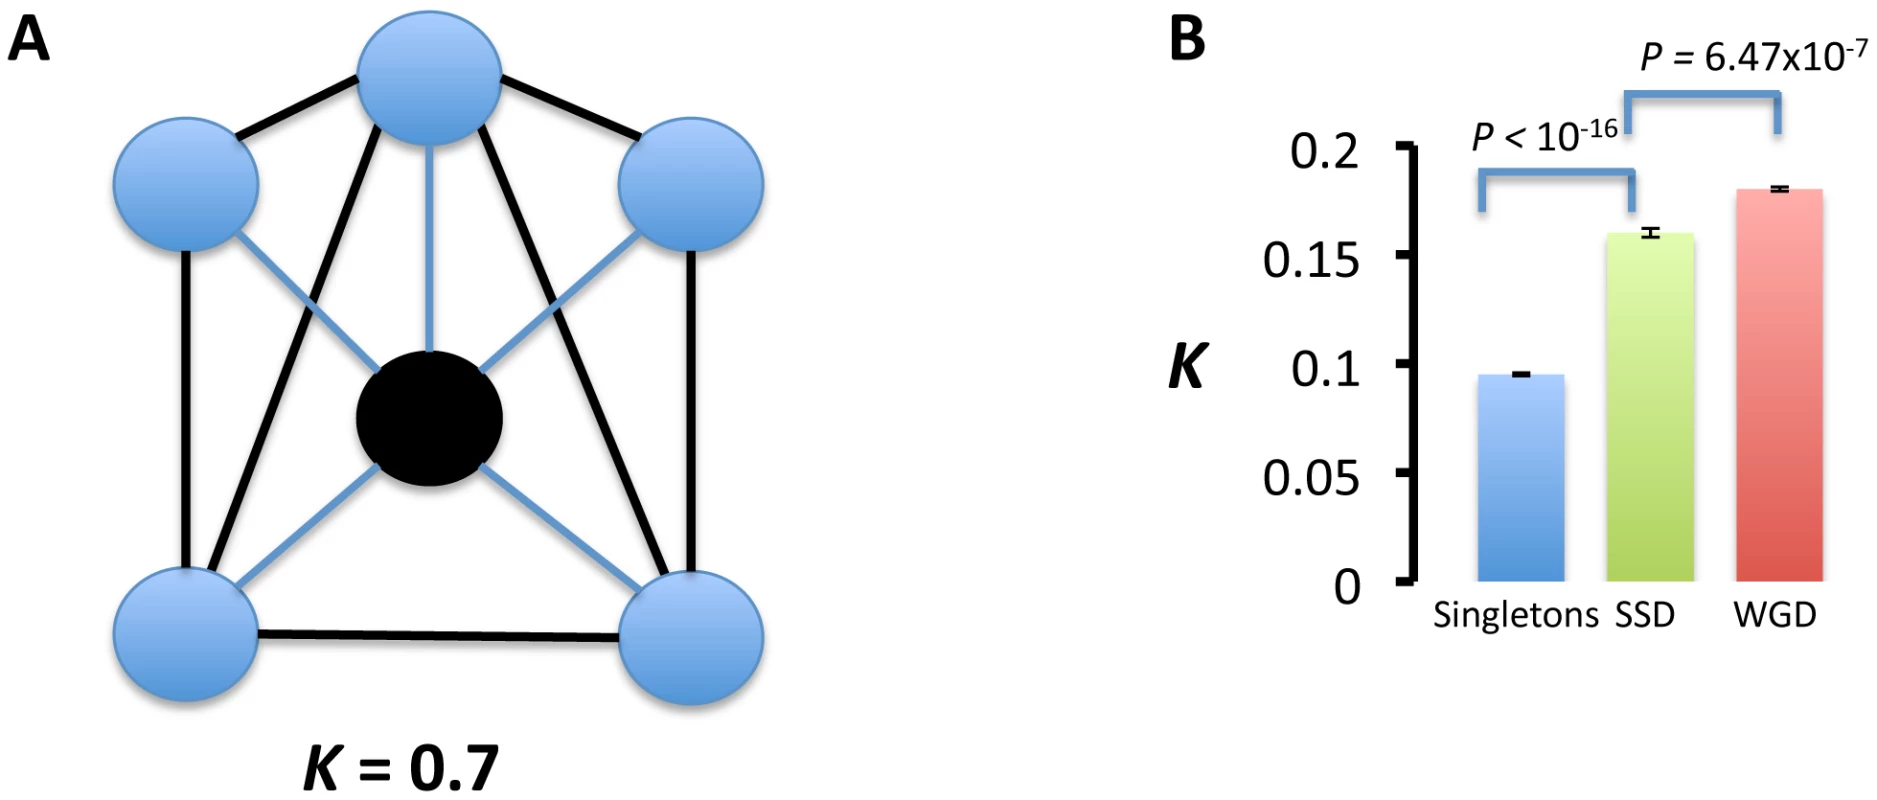 Interaction partners of duplicated genes are more functionally related than those of singletons.